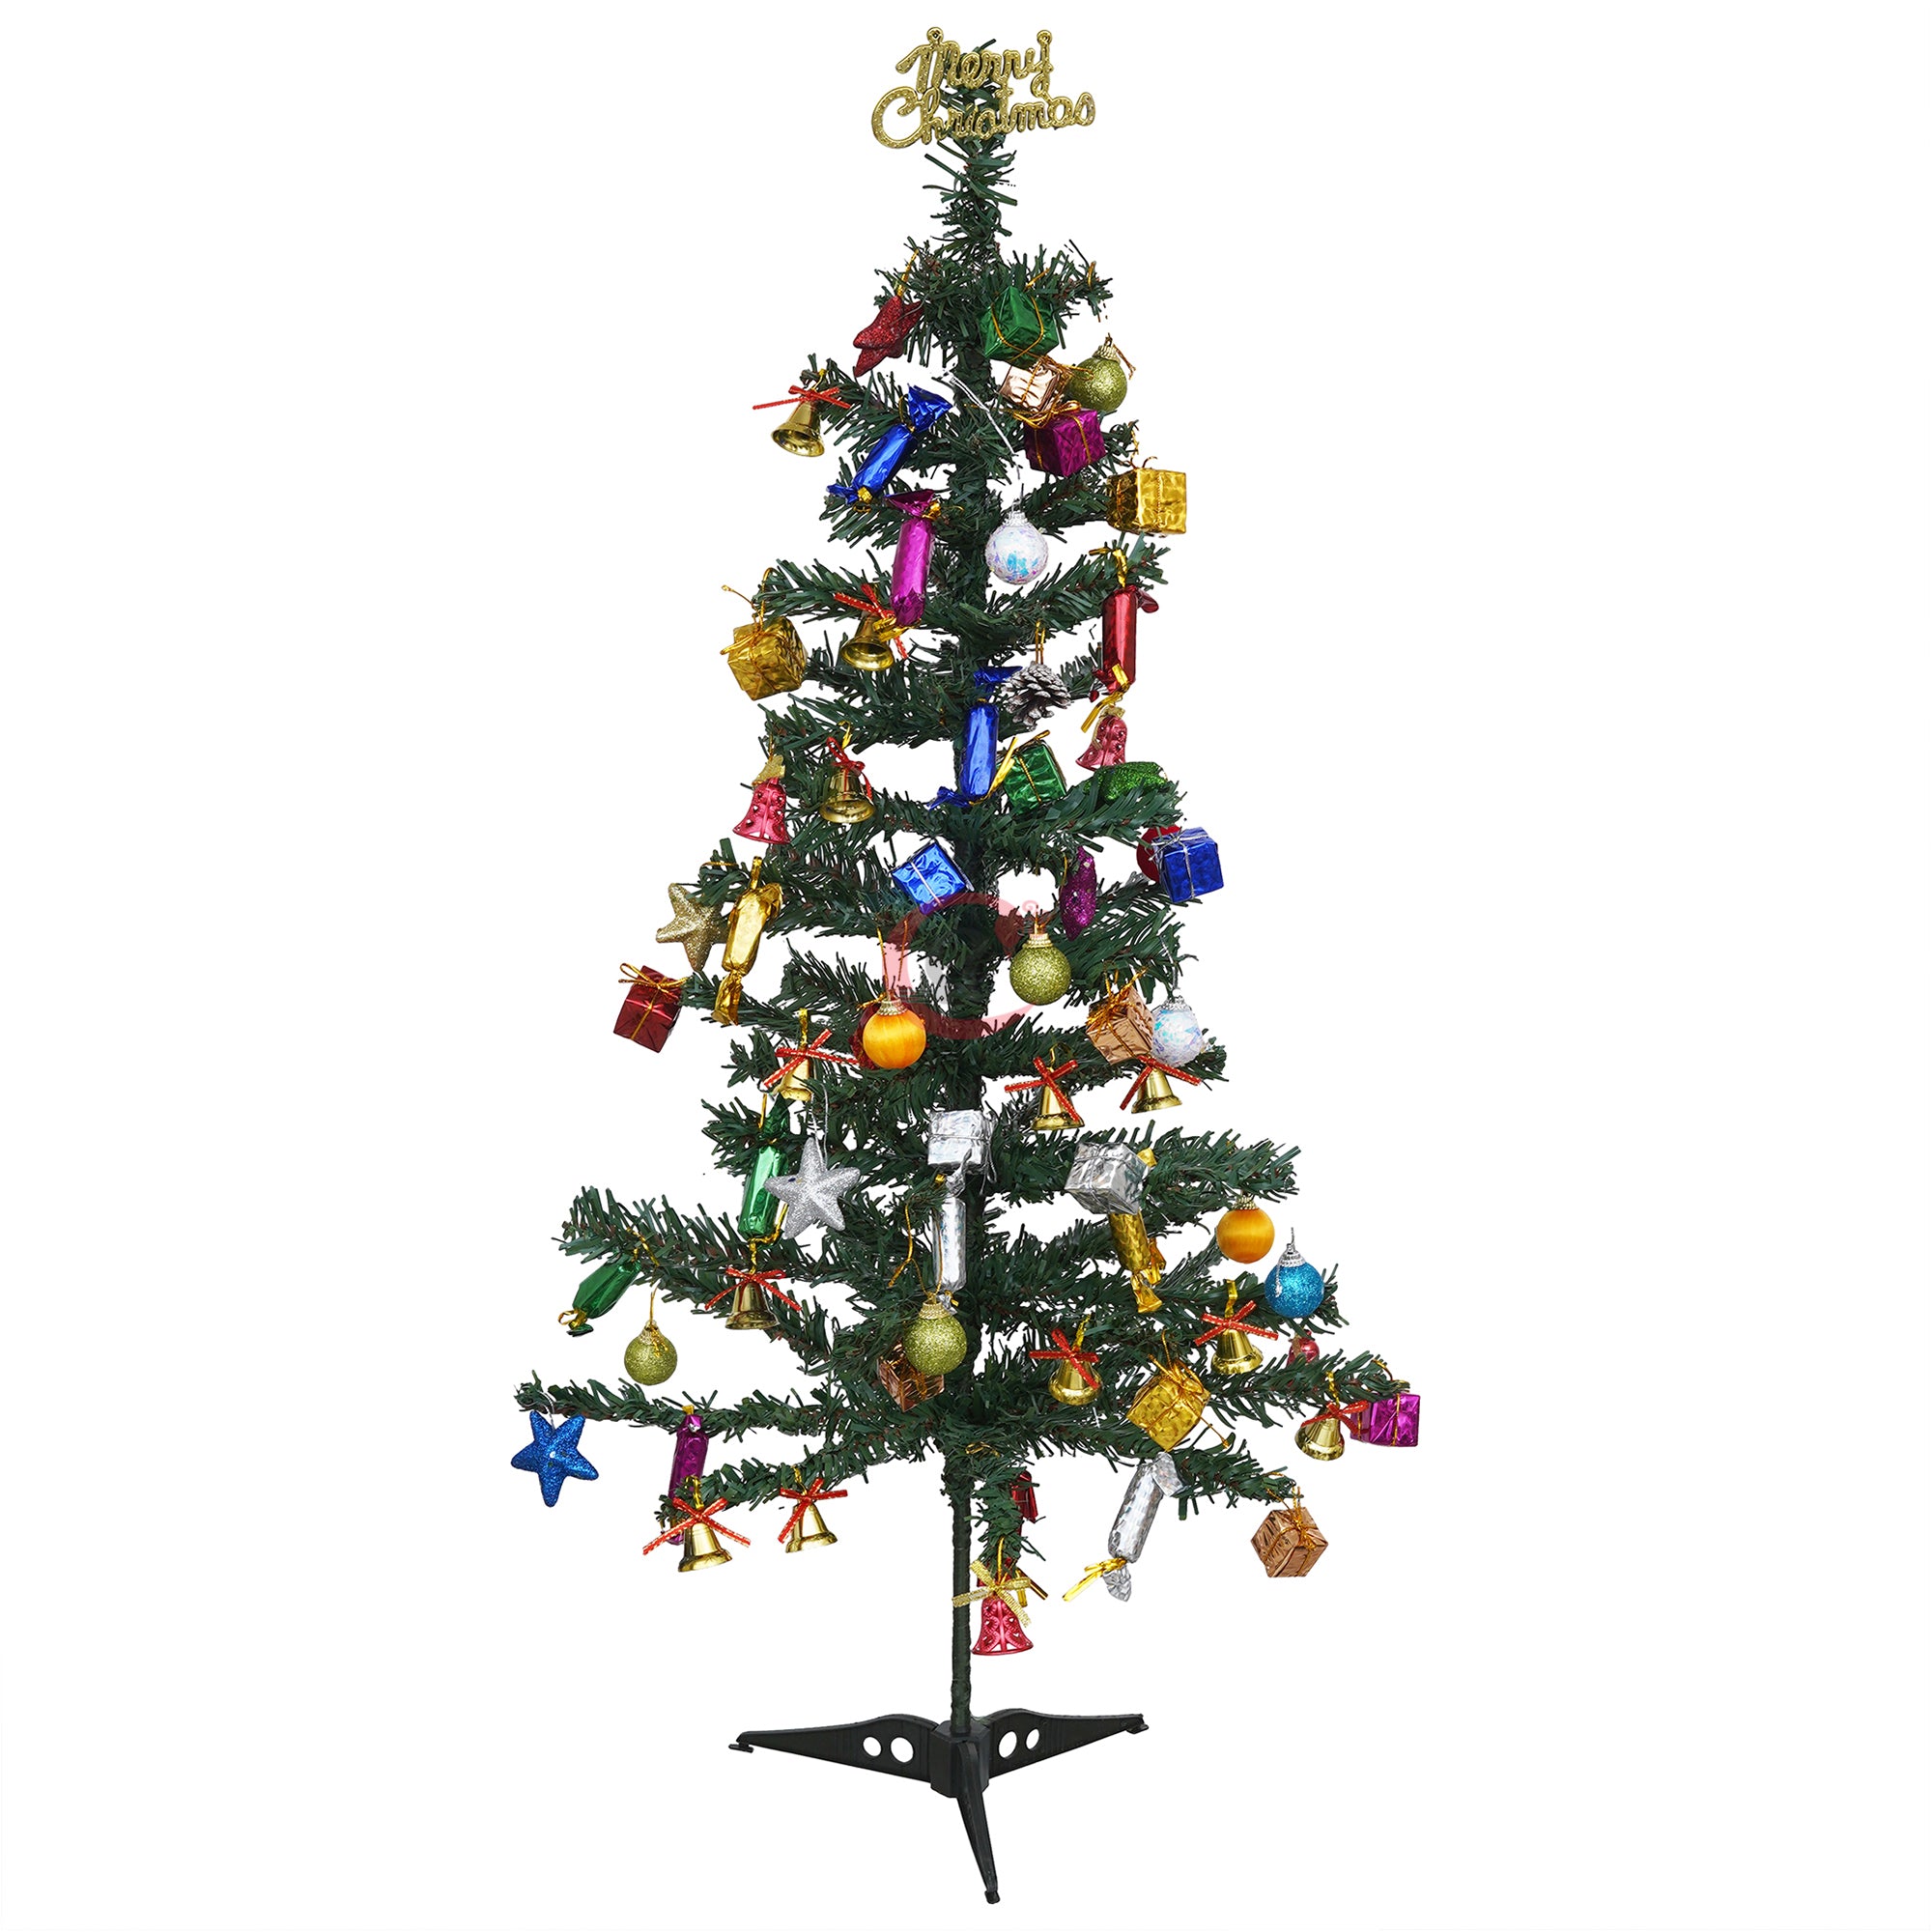 eCraftIndia 4 Feet Green Artificial Christmas Tree Xmas Pine Tree with Stand and 60 Christmas Decoration Ornaments Props - Merry Christmas Decoration Item for Home, Office, and Church 6